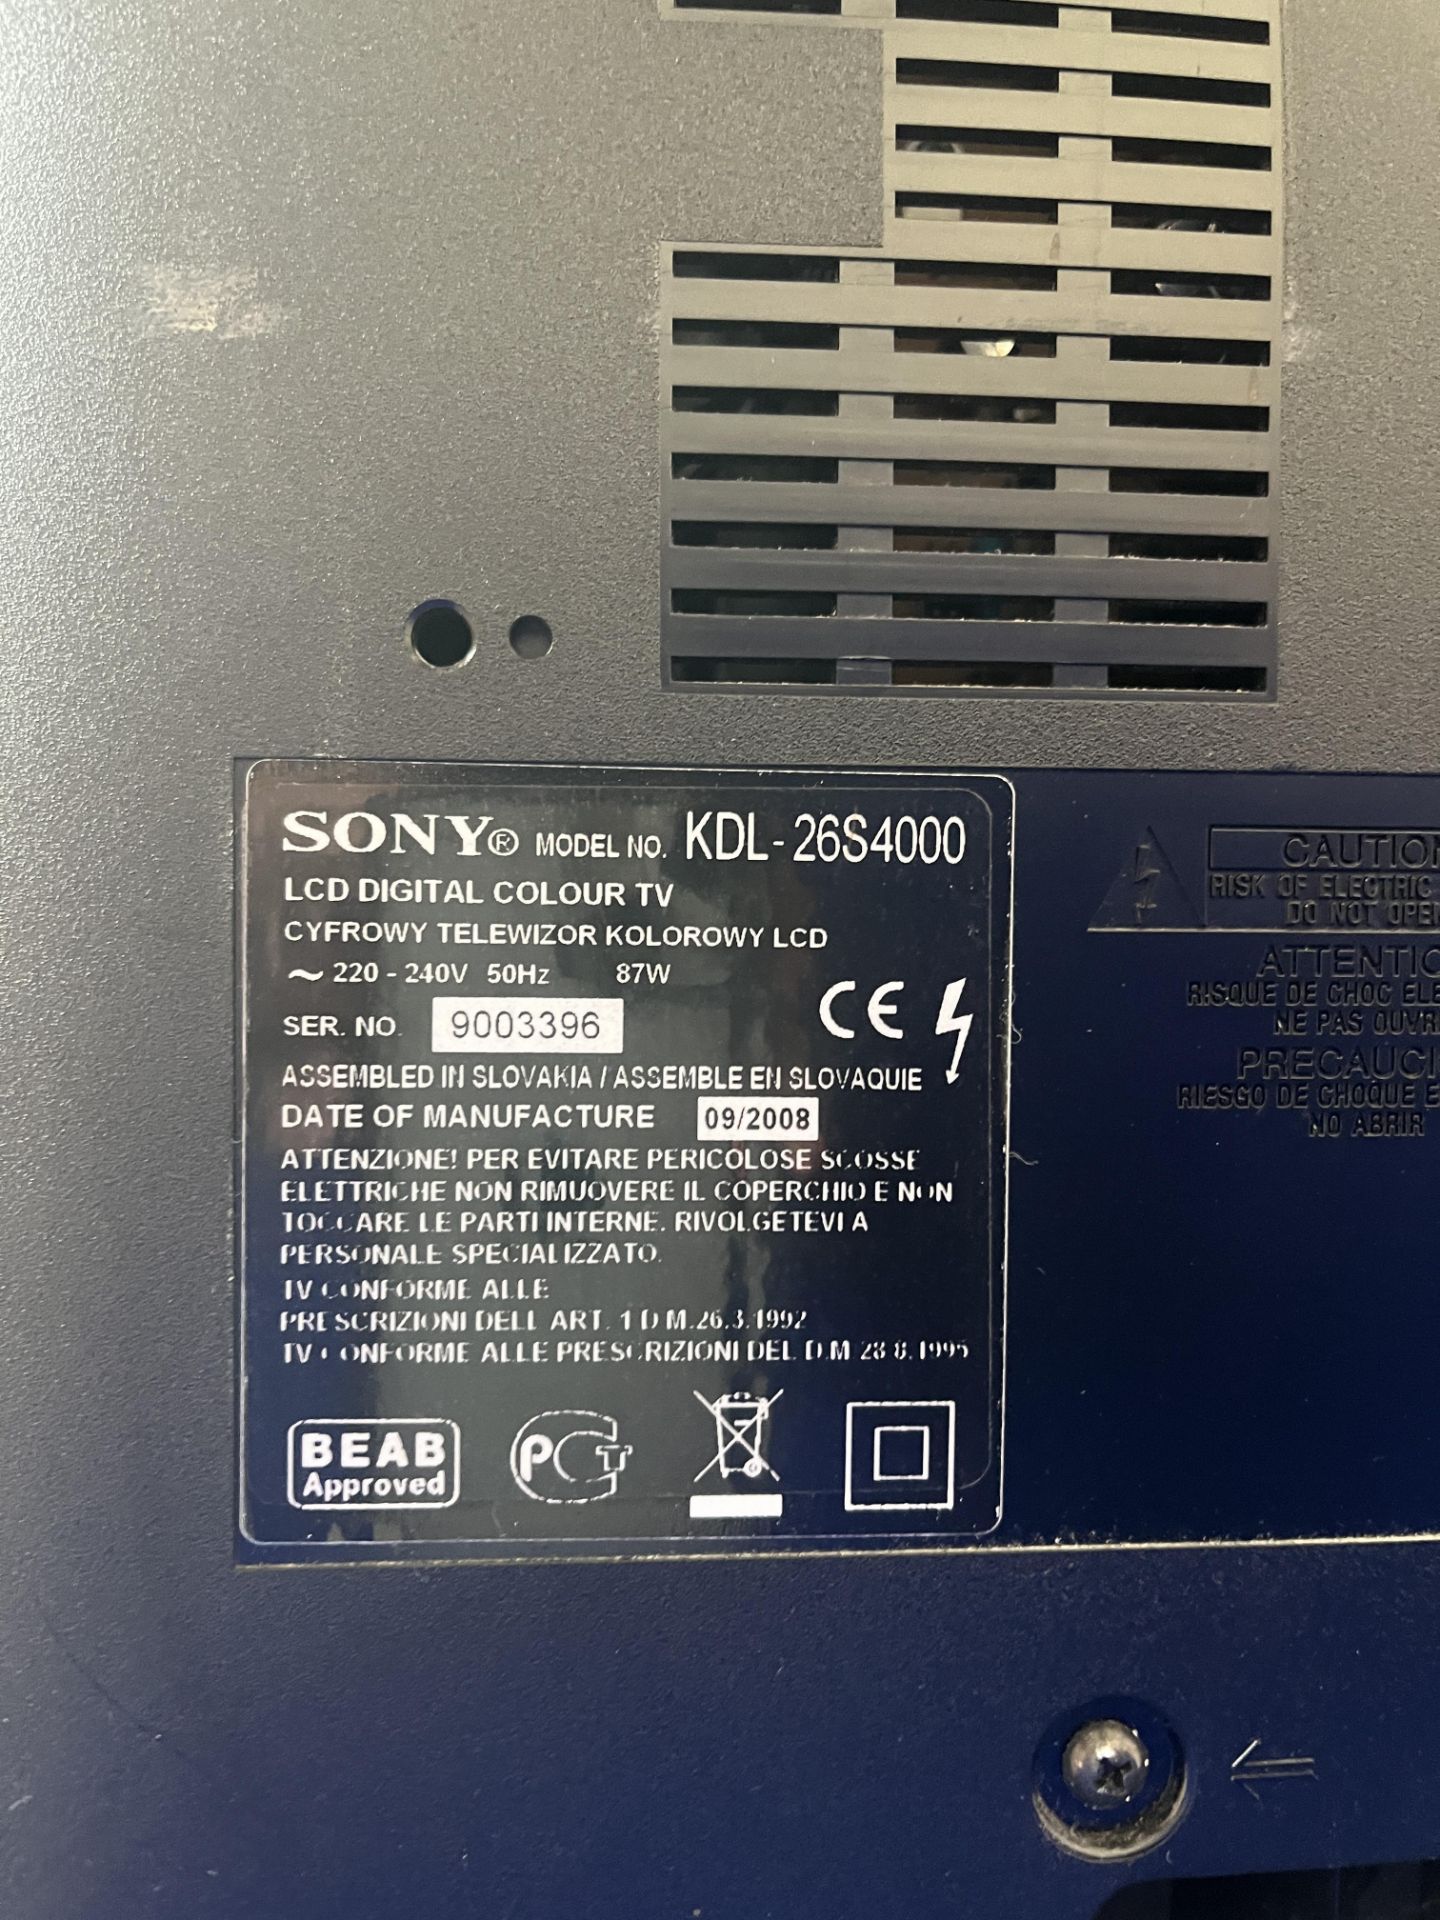 Sony Bravia LCD Colour TV - Image 4 of 6